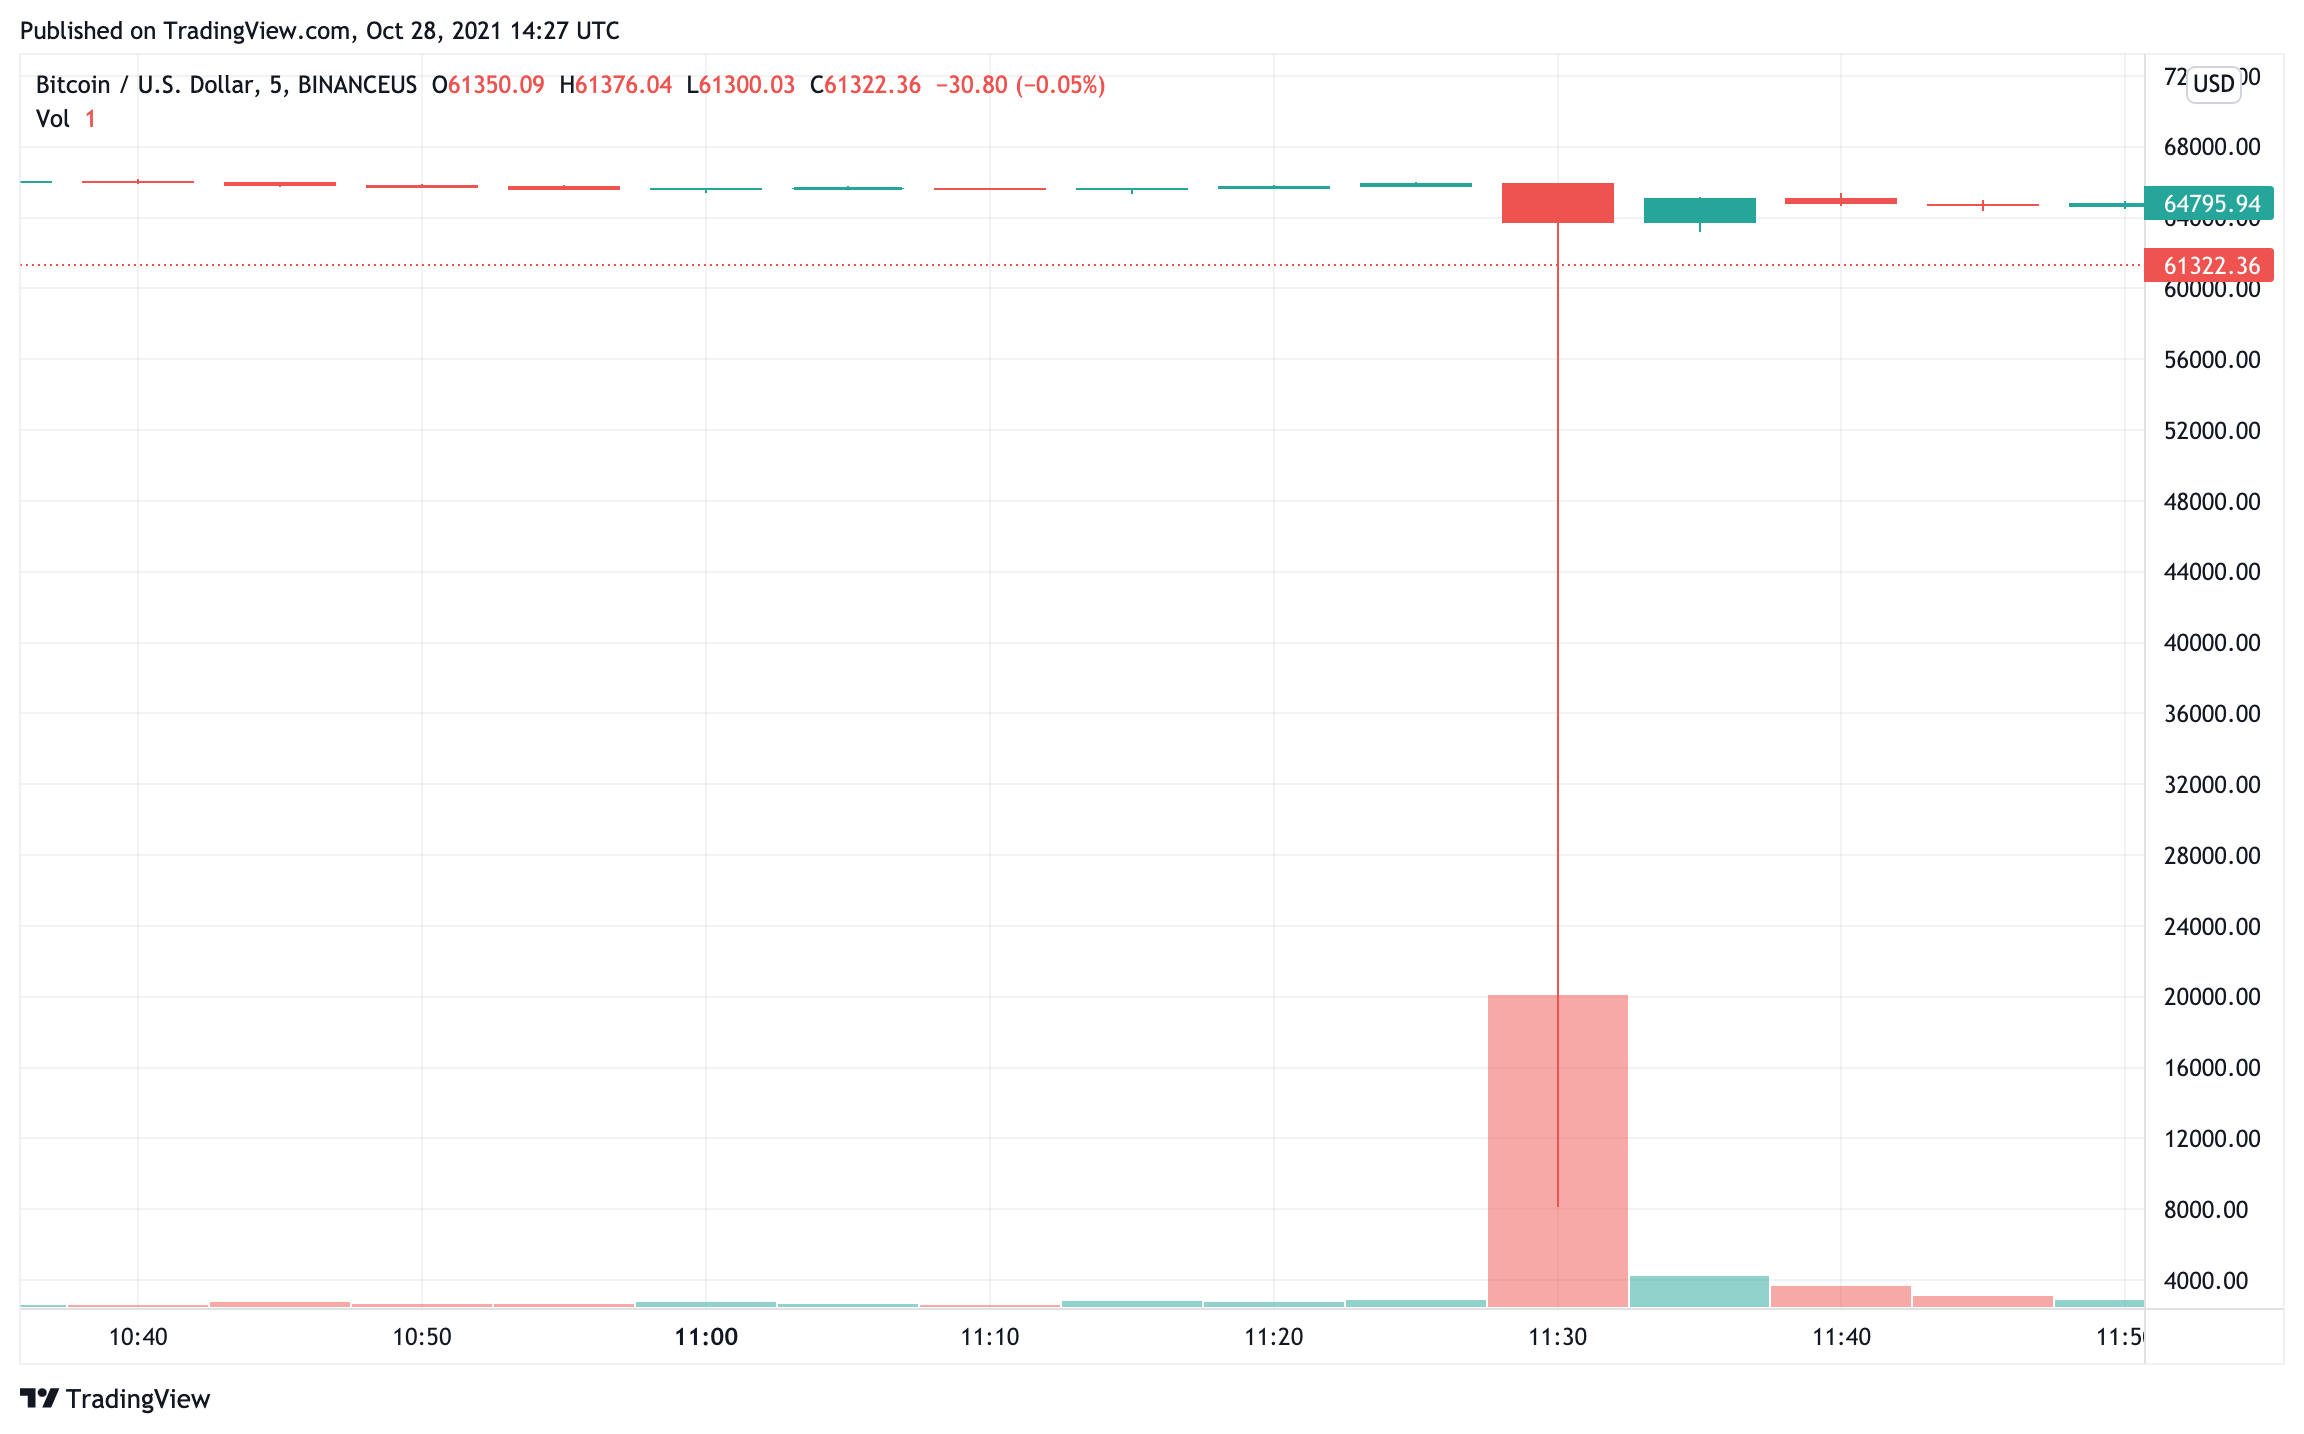 Someone managed to pick up Bitcoin at \$8,000 making over 600% in unrealised profits in one trade! Source: tradingview